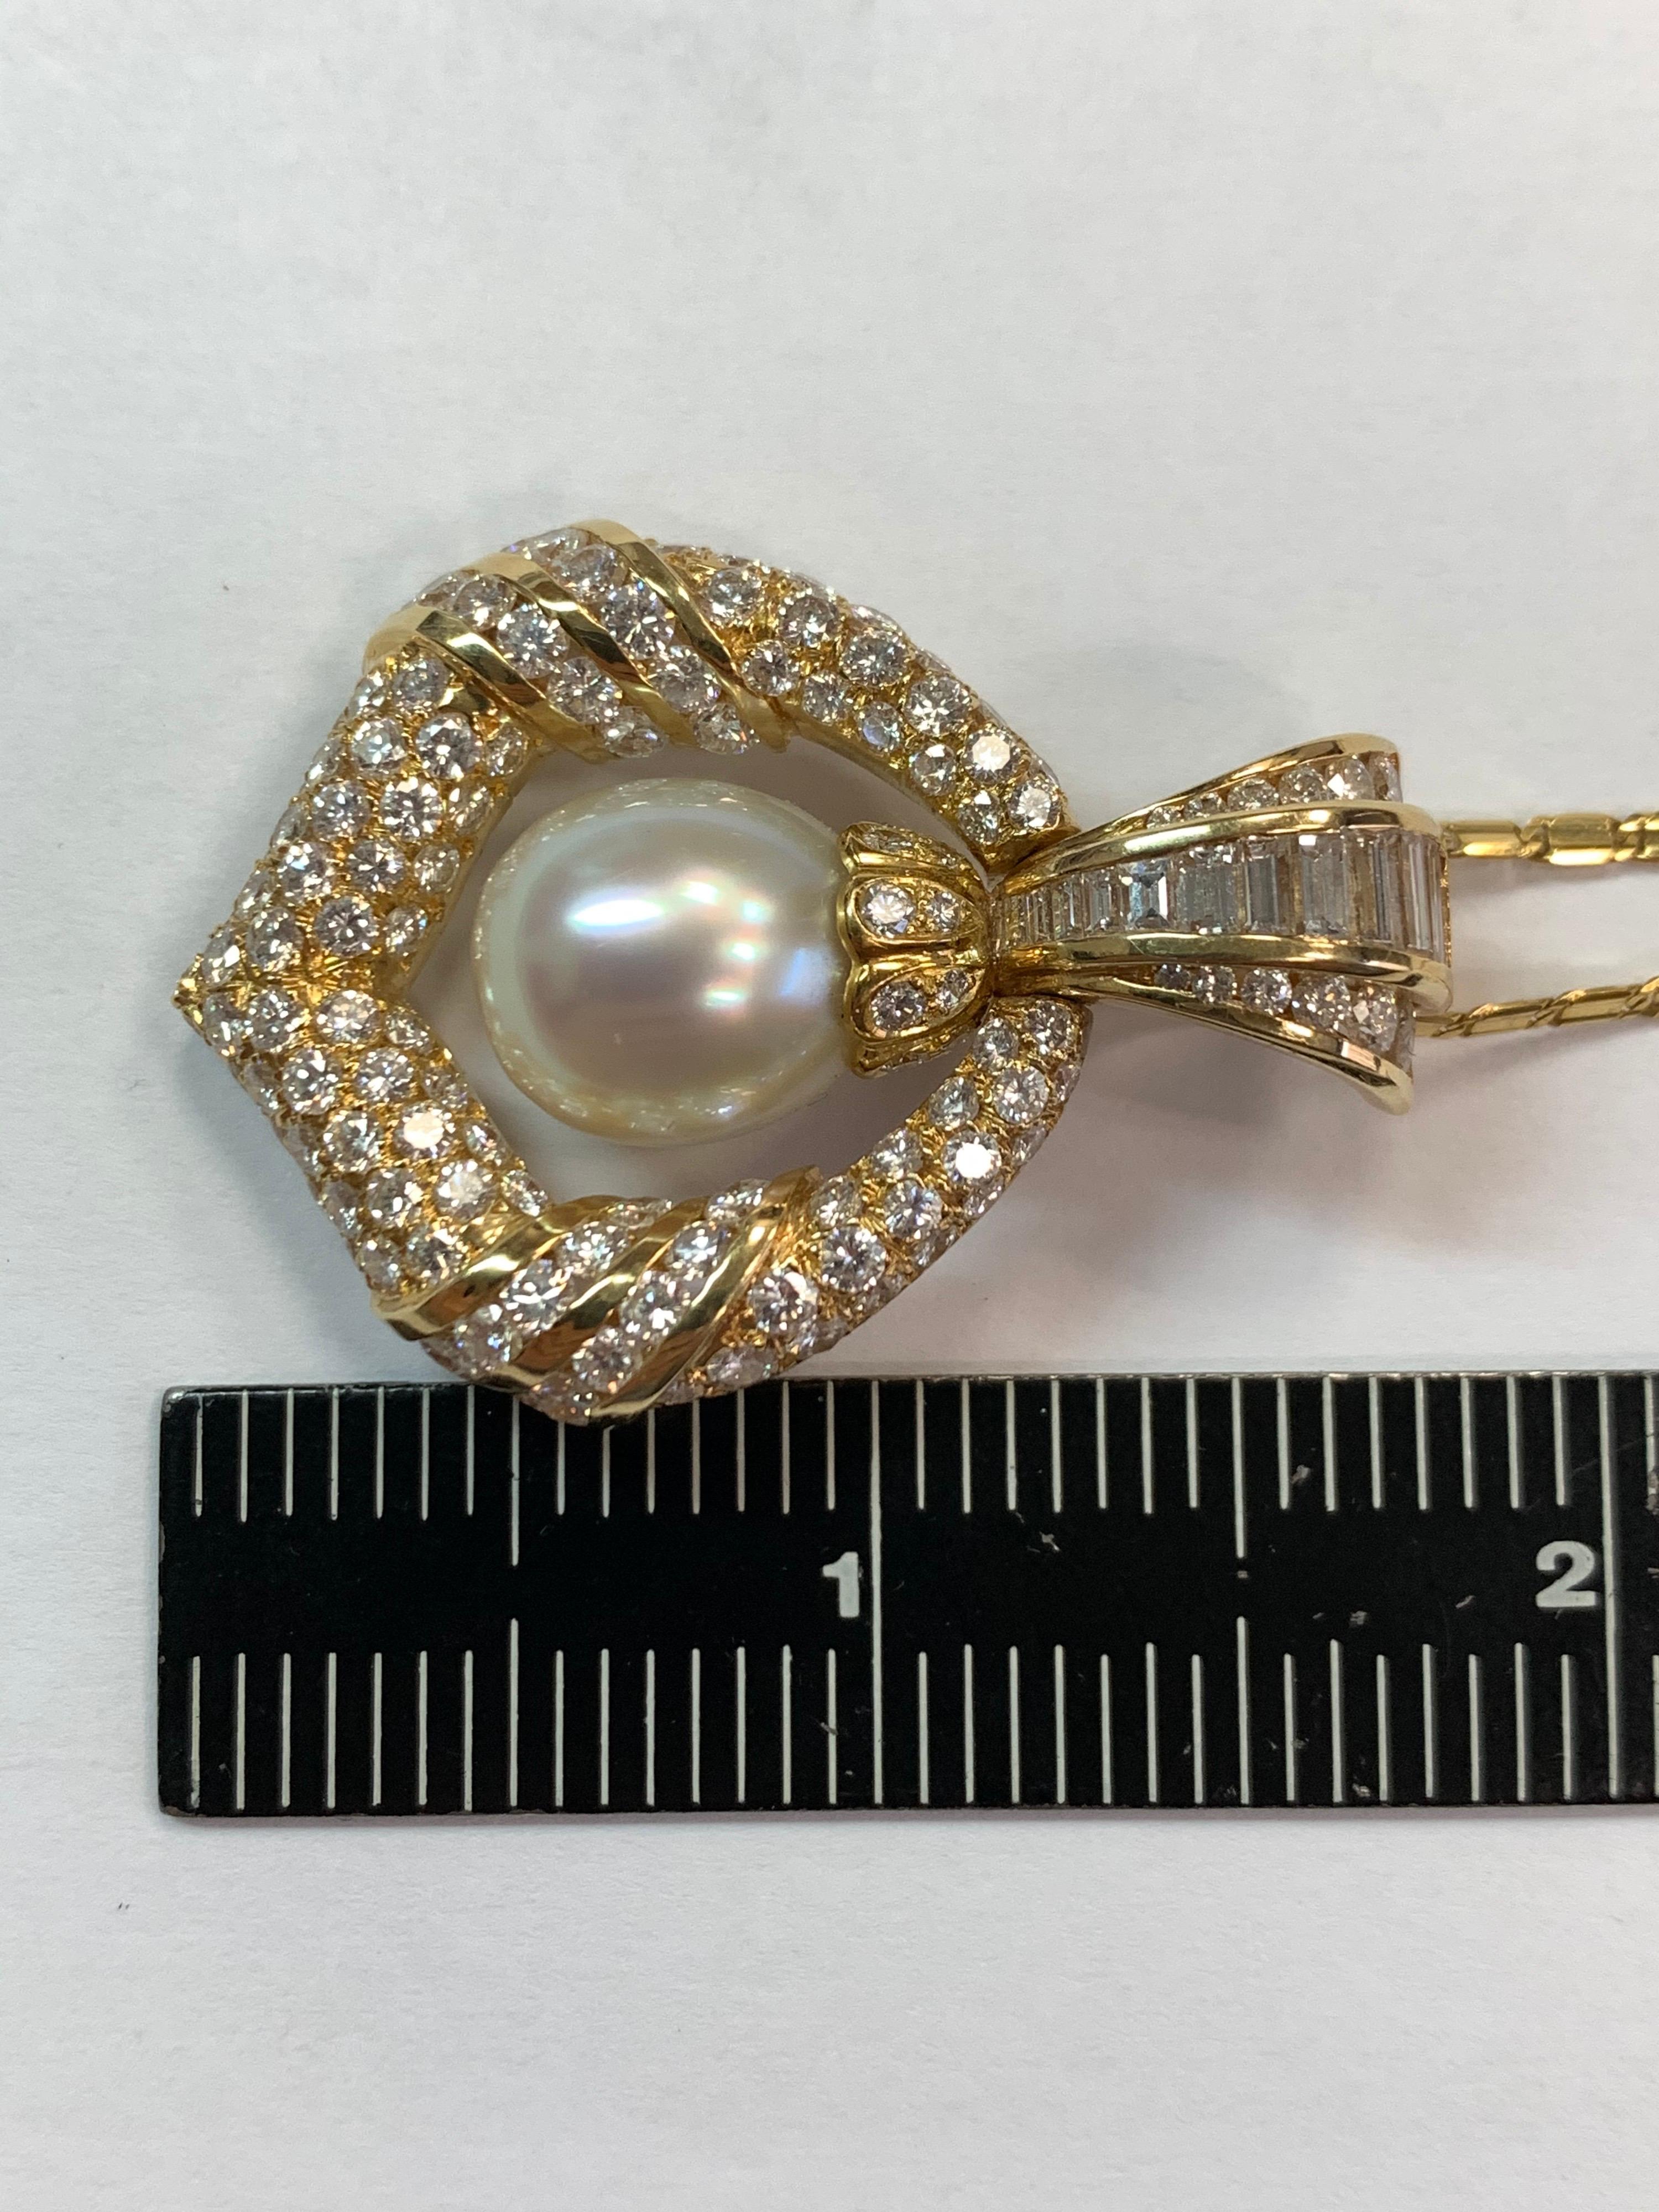 Retro Gold Necklace 7.5 Carat Natural Round Colorless Diamond & Pearl circa 1950 For Sale 3